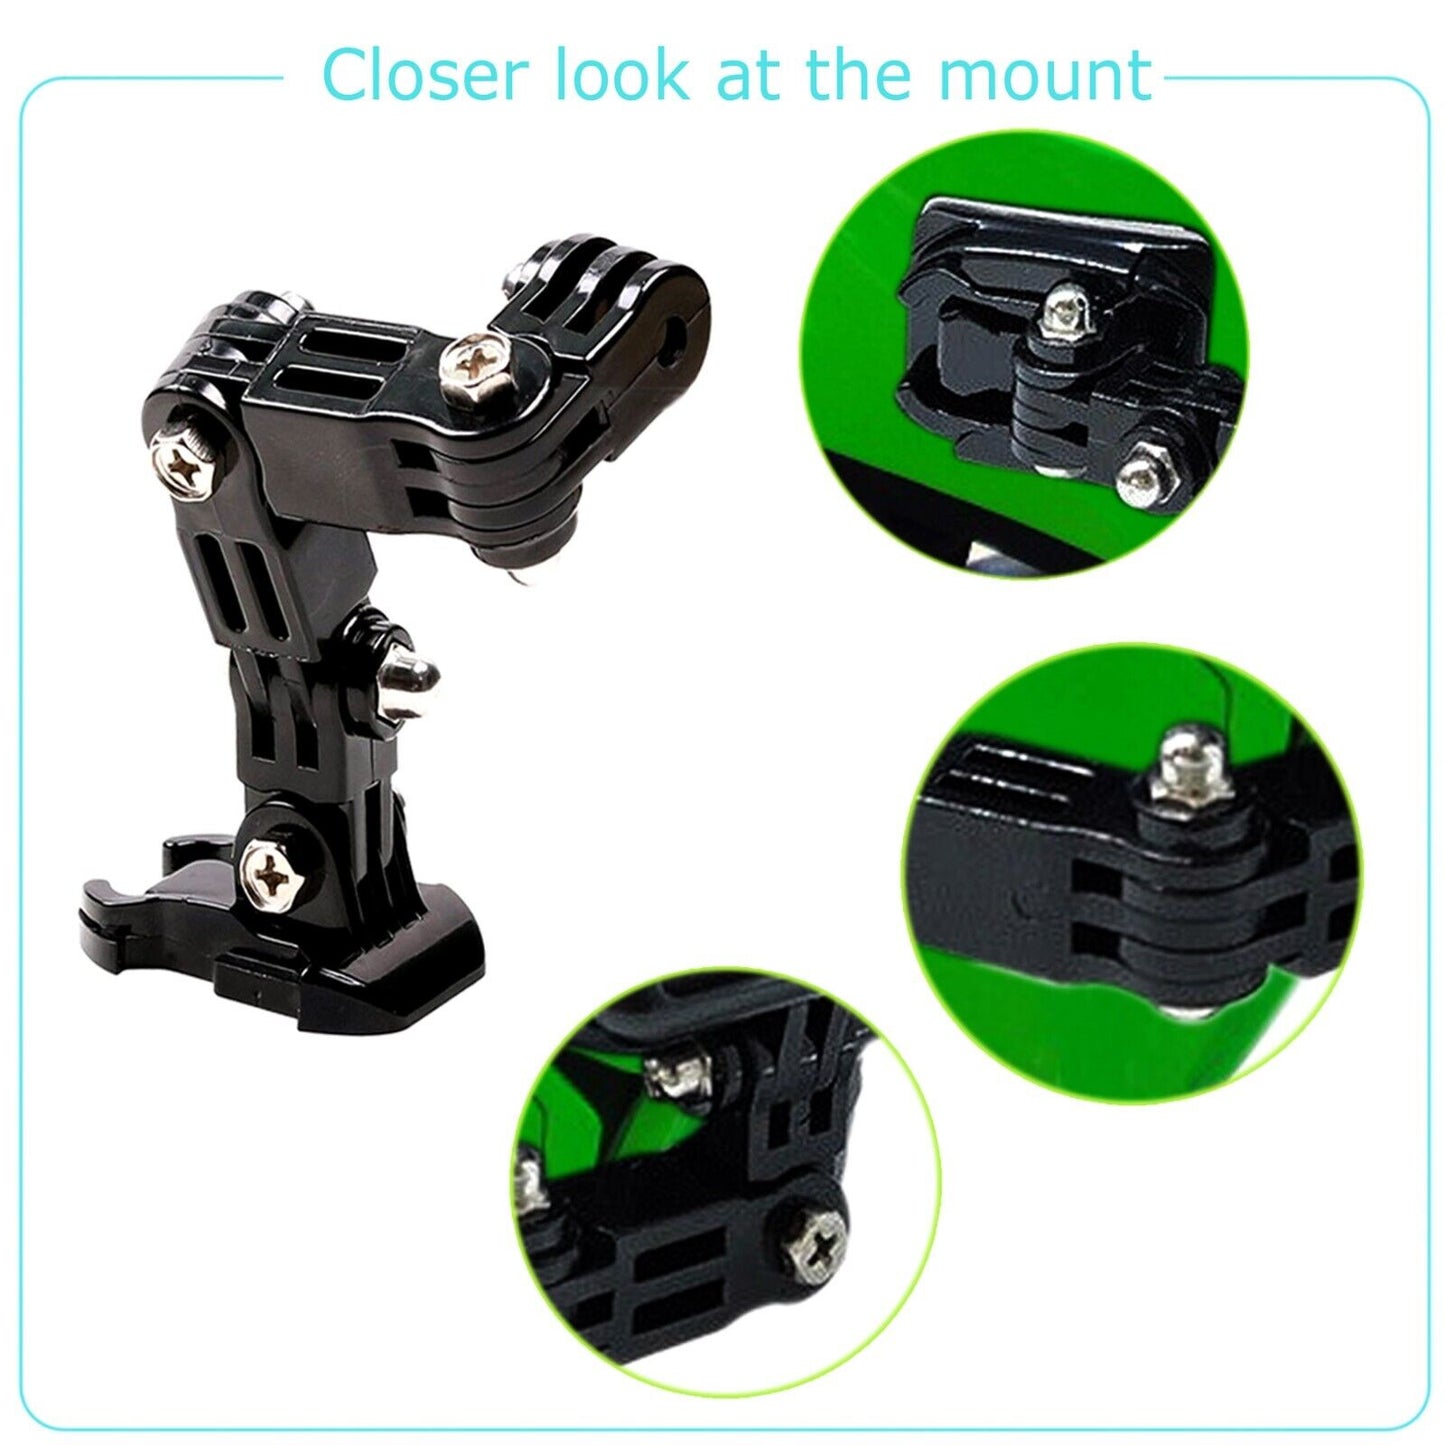 Motorcycle Helmet Chin Motor Mount Kit for GoPro Hero Sports Camera Accessories CO: 294